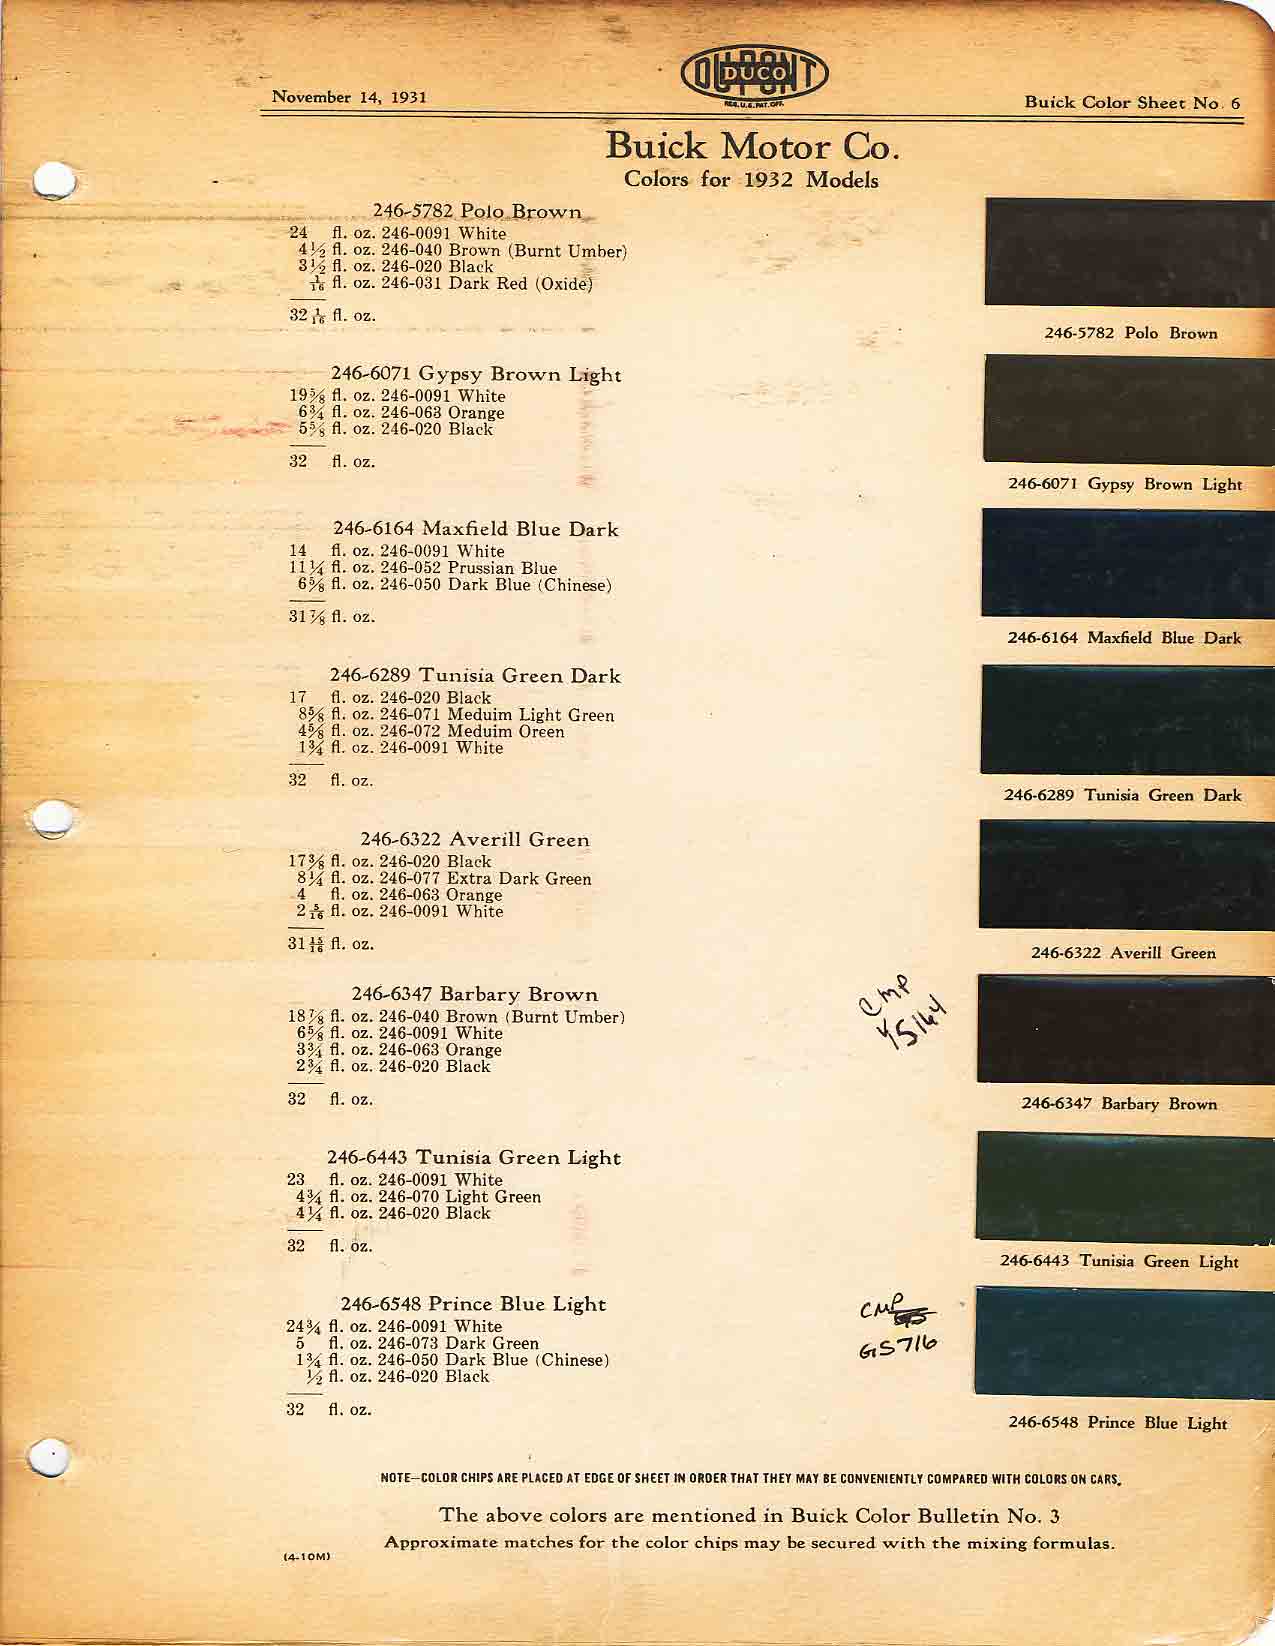 Page 5 of 6 for 1932 Buick Paint Codes and color chart